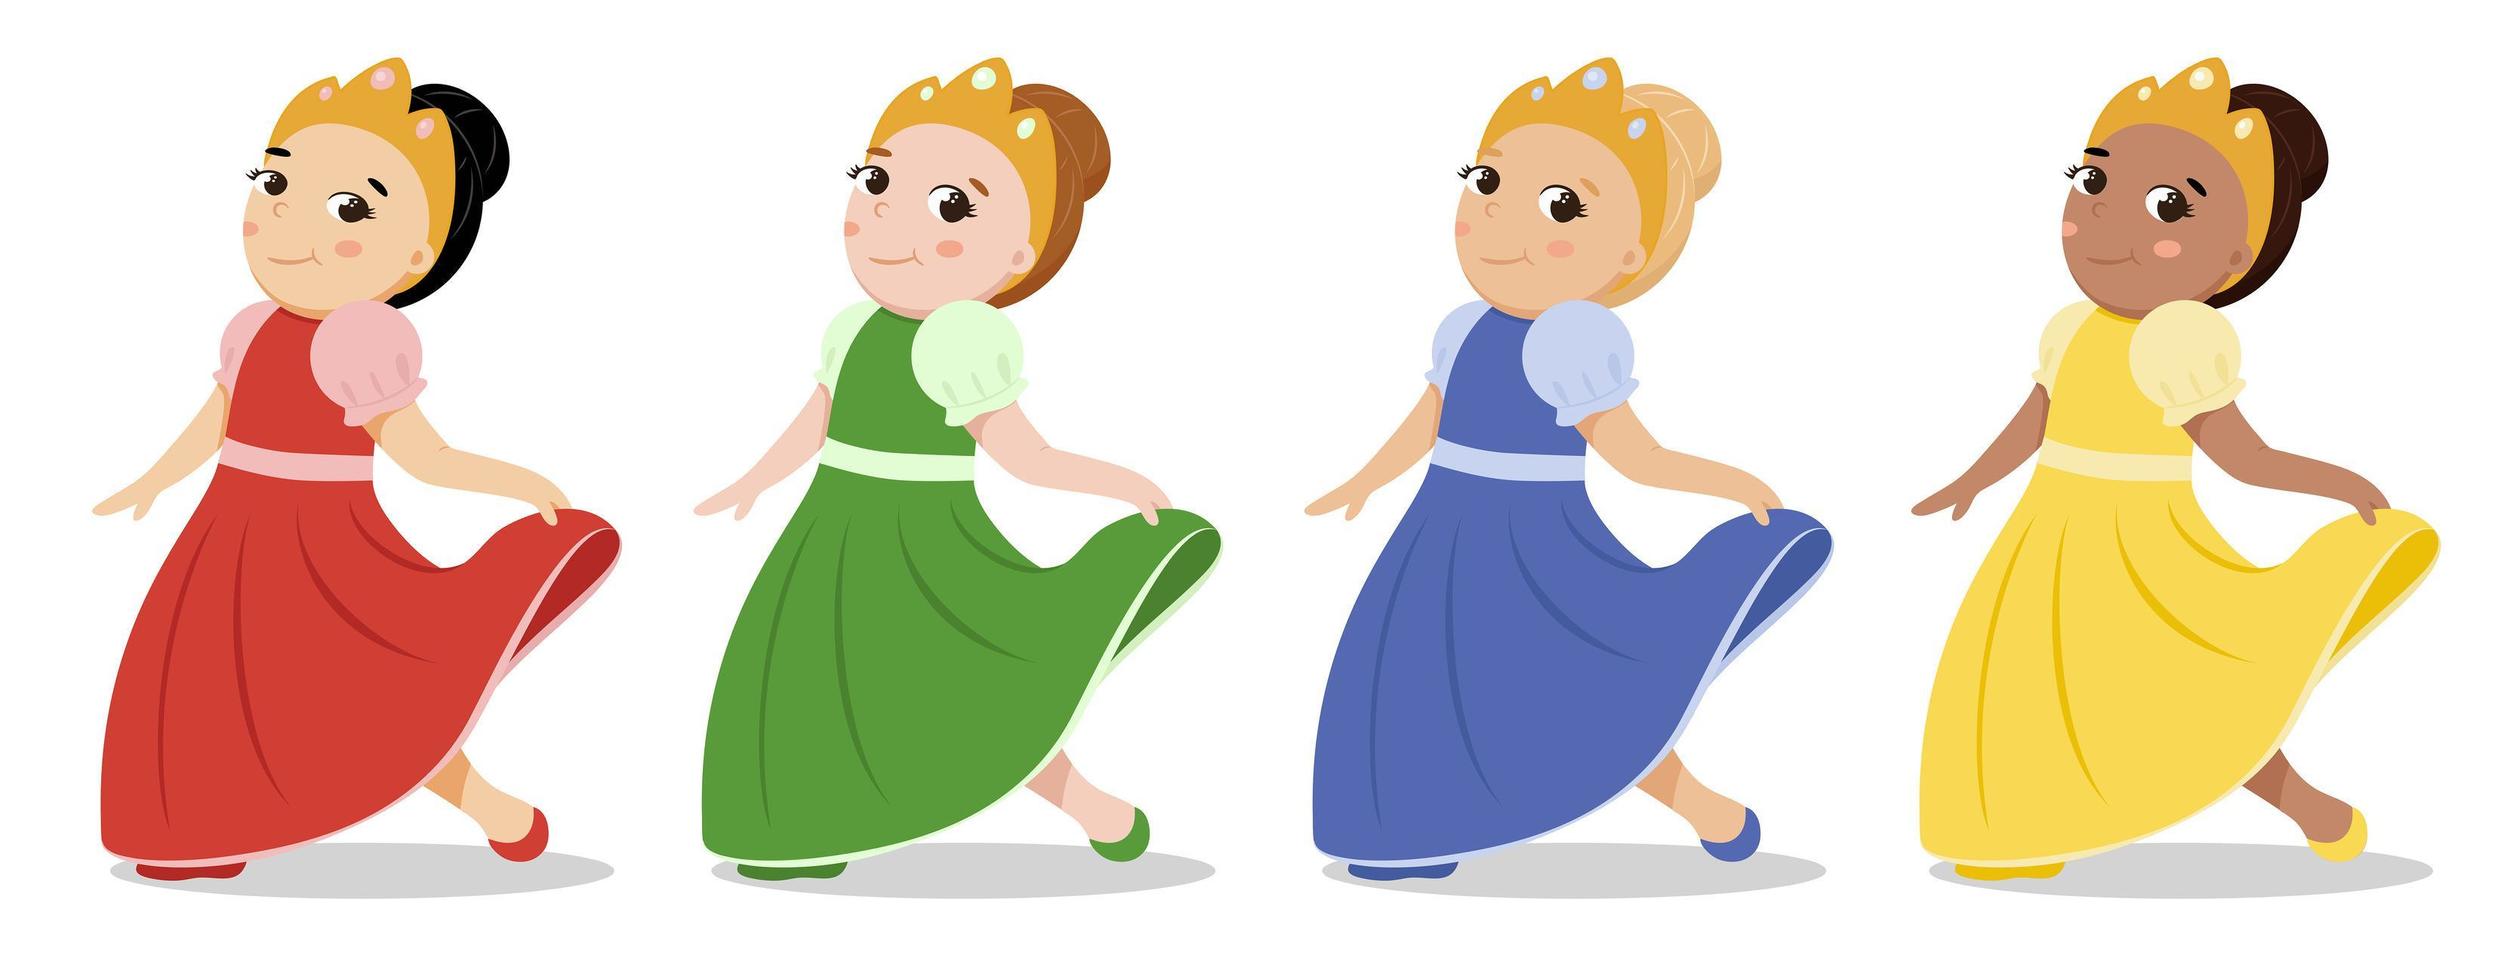 Illustration of cute little princess in a bright dress with a crown on her head vector